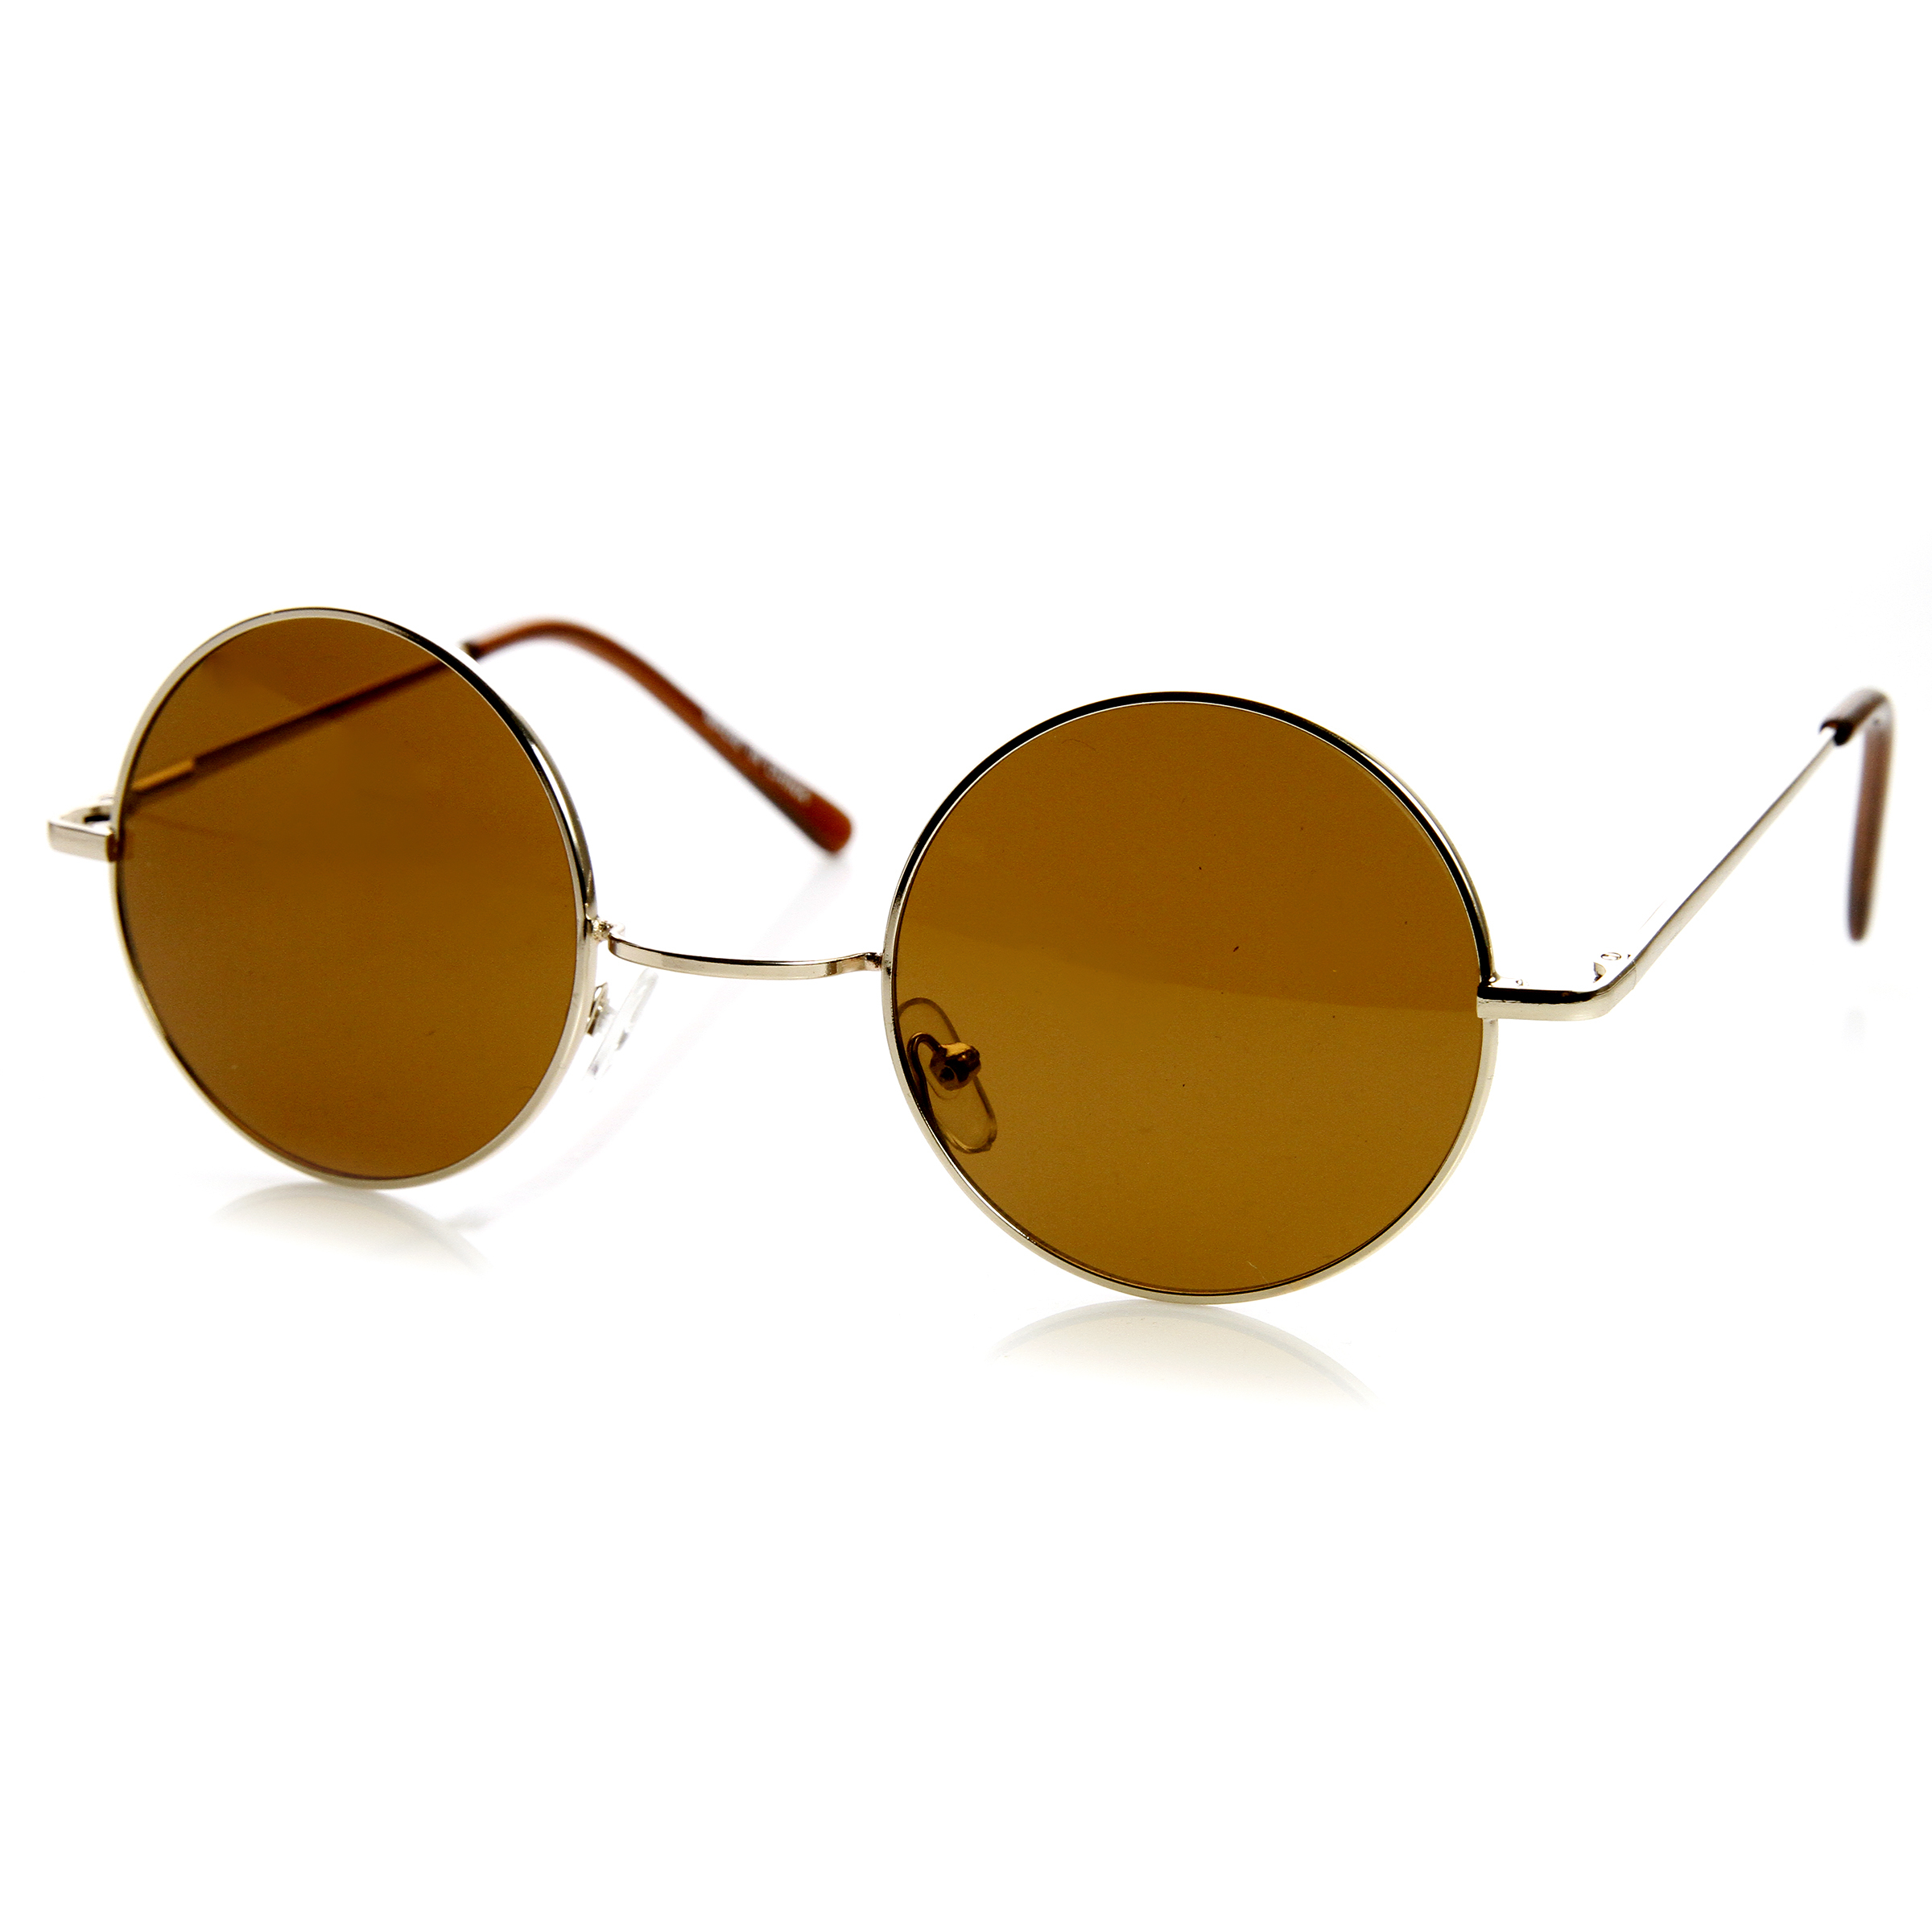 Lennon Style Round Circle Metal Sunglasses W/ Color Lens Tint - Gold Brown